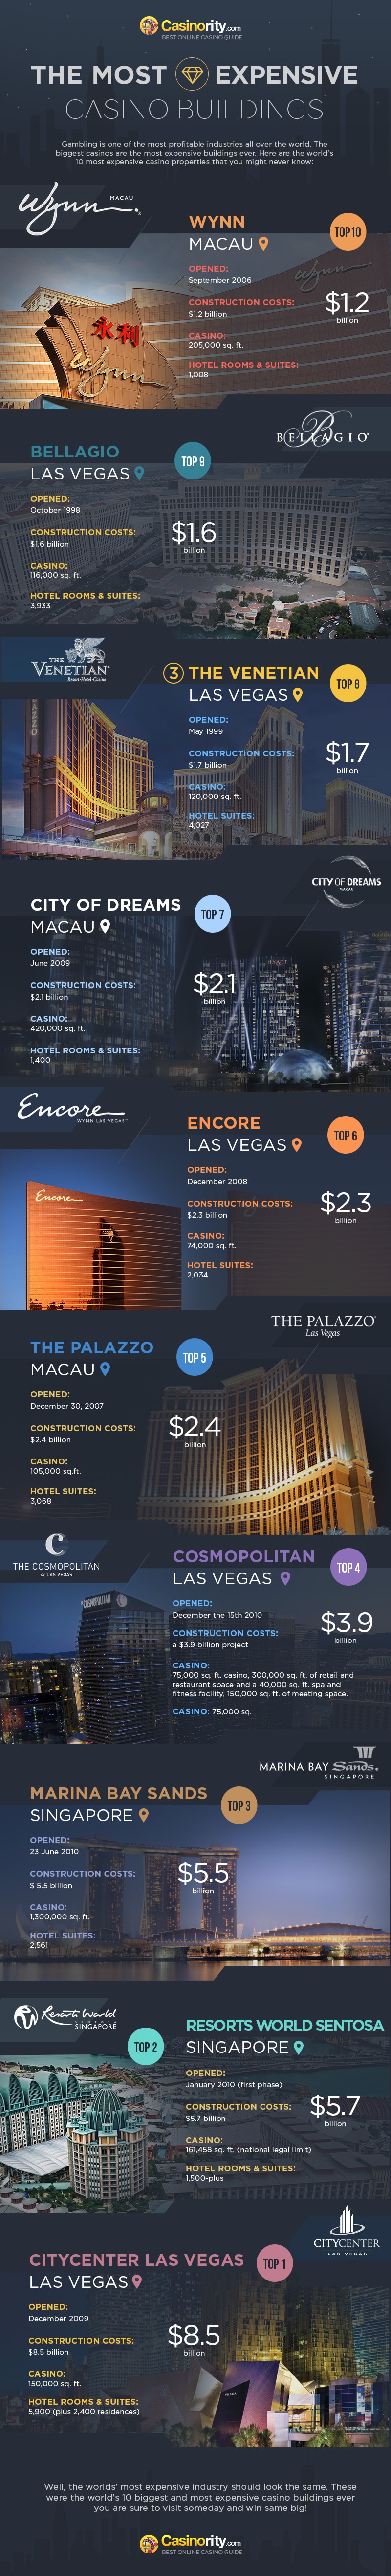 Top 10 Most Expensive Casino Buildings In The World [Infographic]